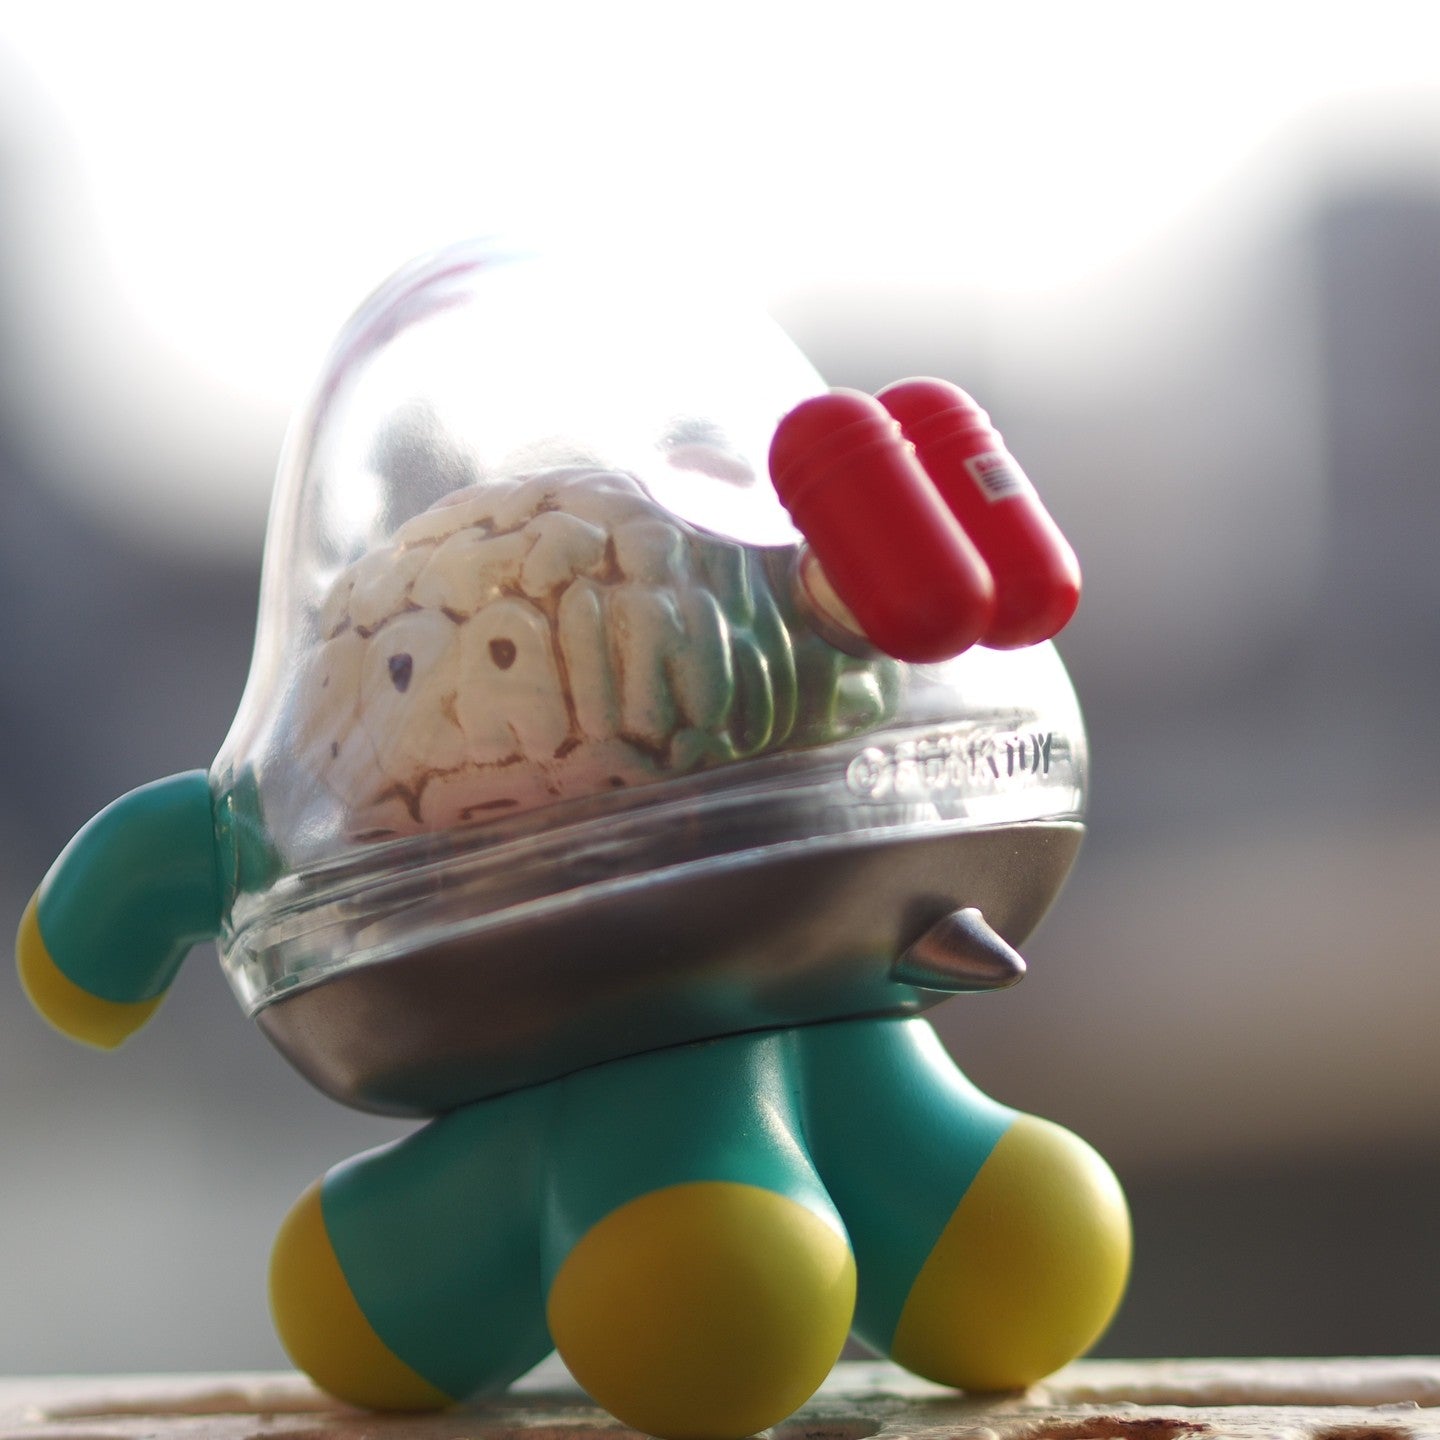 A toy with a brain inside, Mr.Brain - Brains Attacks - Preorder. Material: sofubi / Resin. Size: 9 cm tall. From Strangecat Toys, a blind box and art toy store.